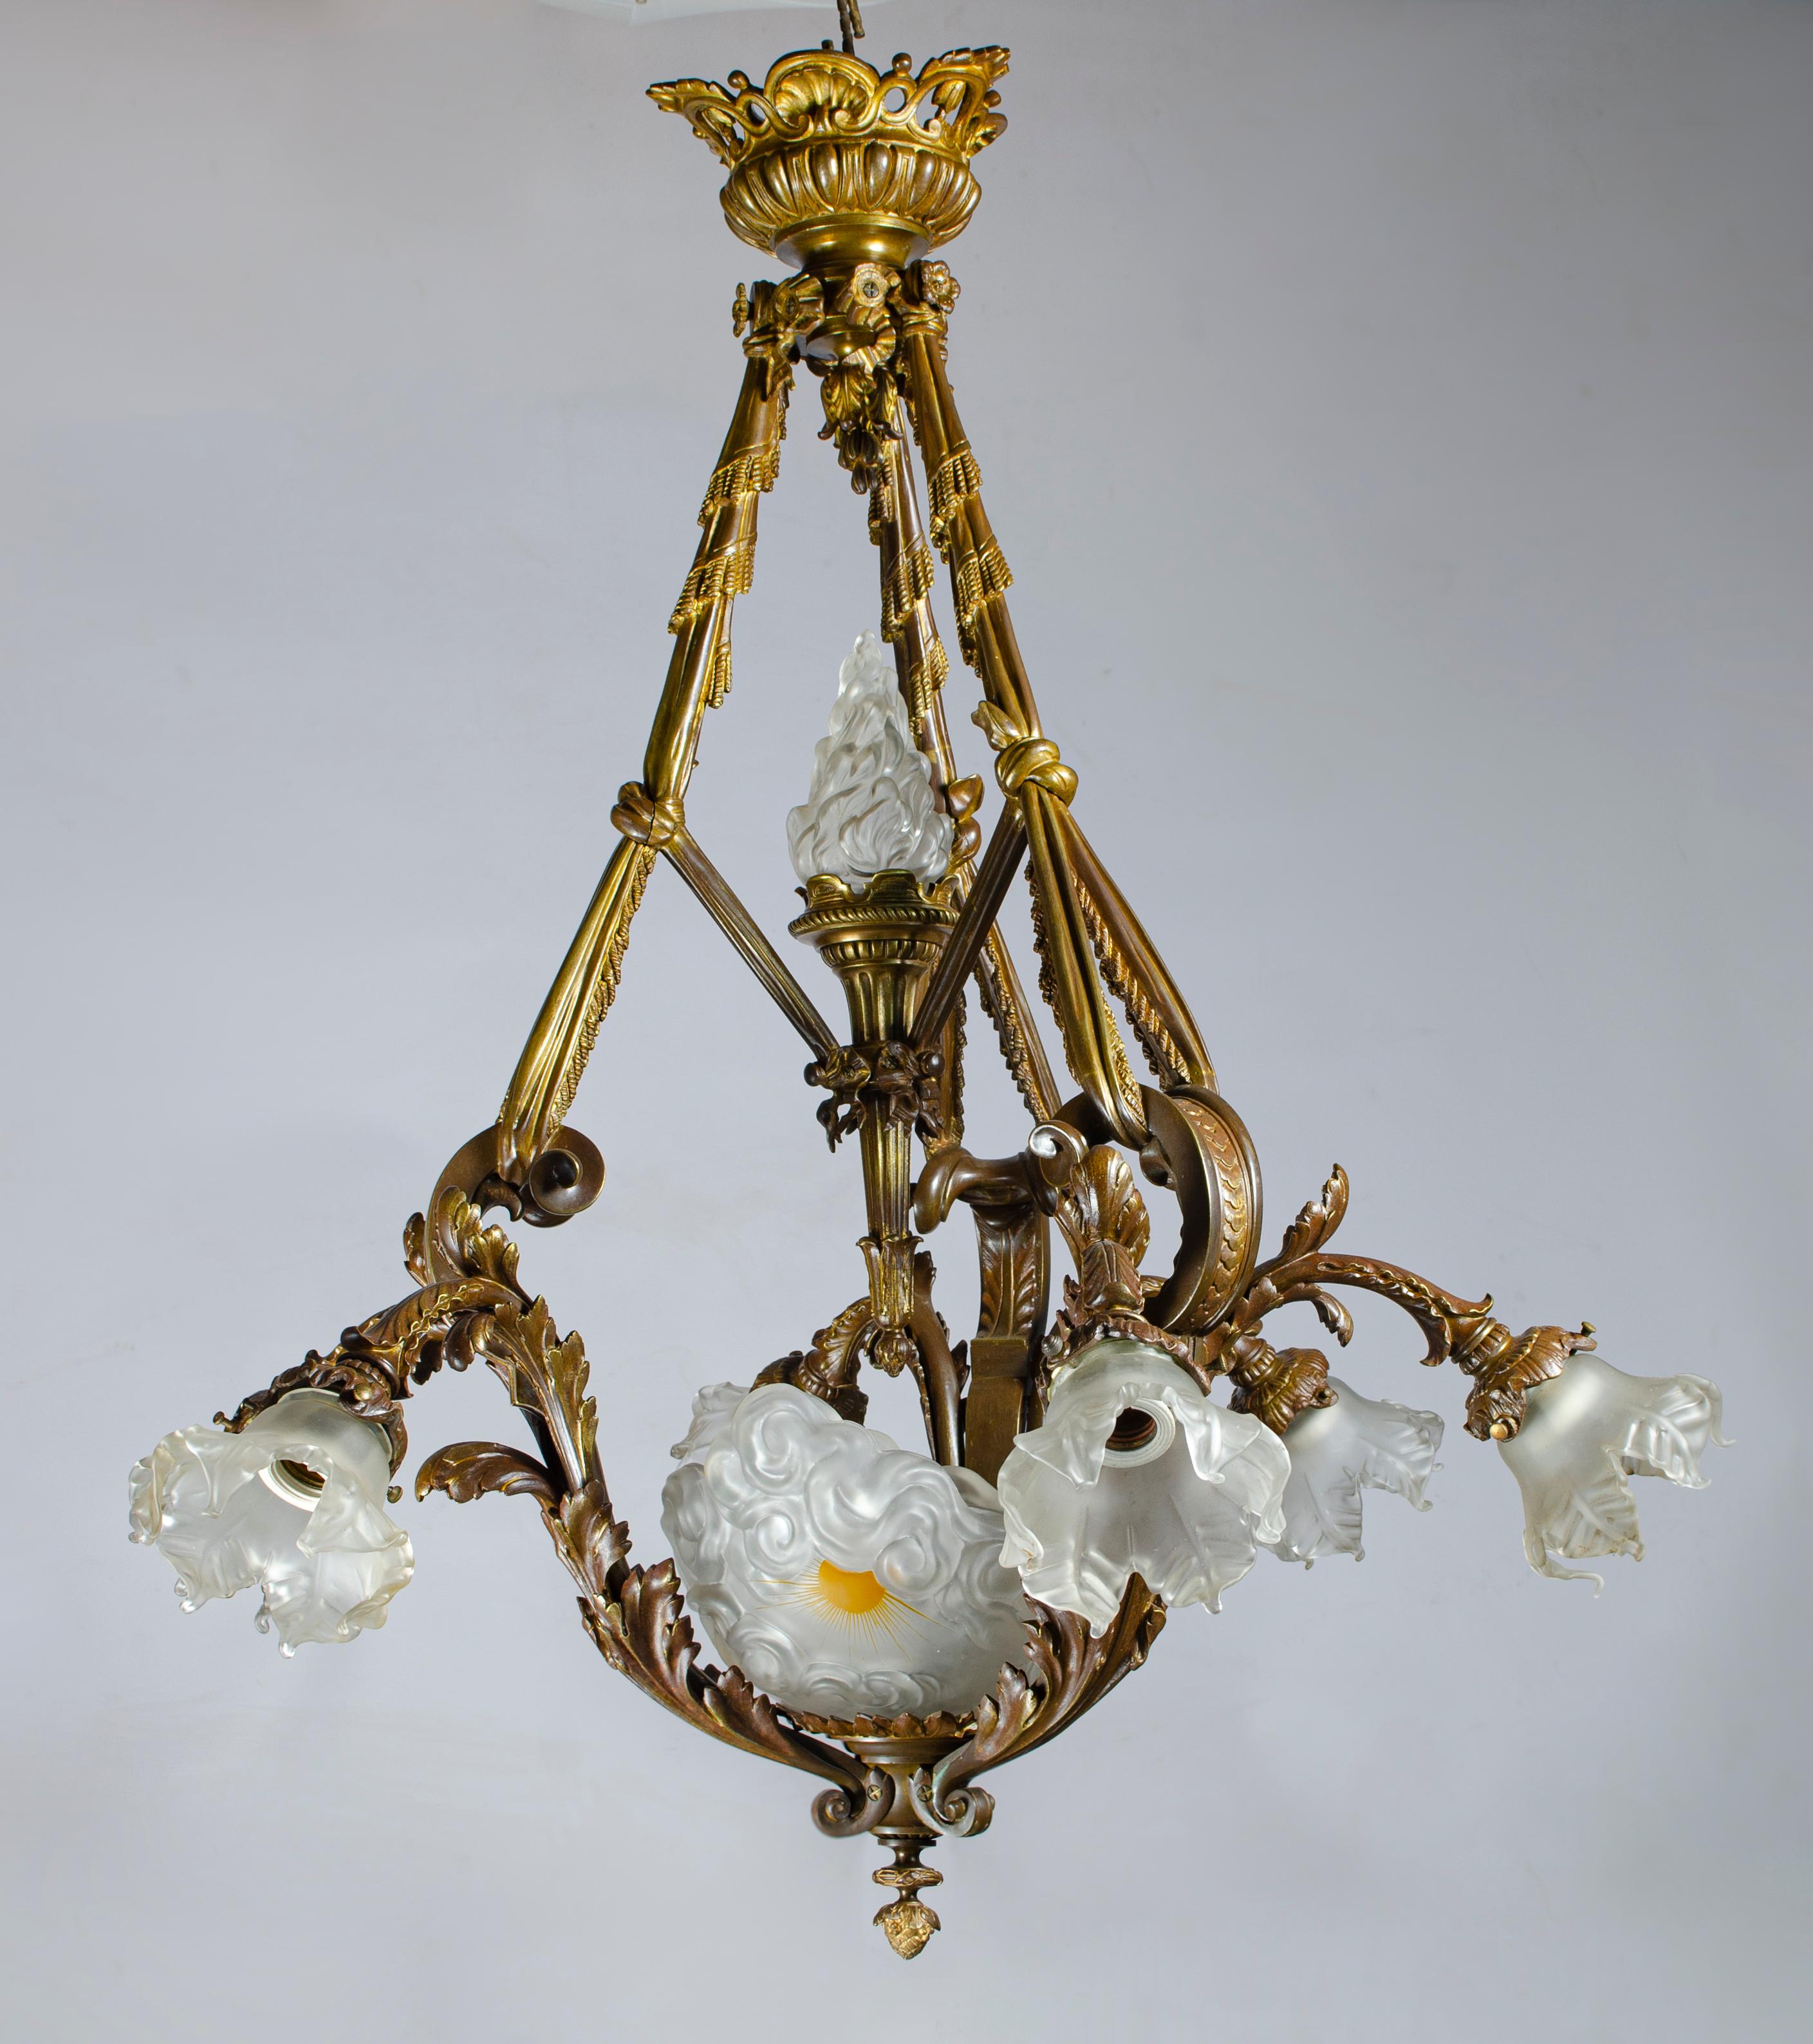 Louis XVI style chandeliere
Origin France Circa 1900
gilt bronze, in some places gilding has natural wear.
Electrified 220 W
It has a very rare and high quality central ceiling, possibly Baccarat.
It has 6 lights with original lampshades and